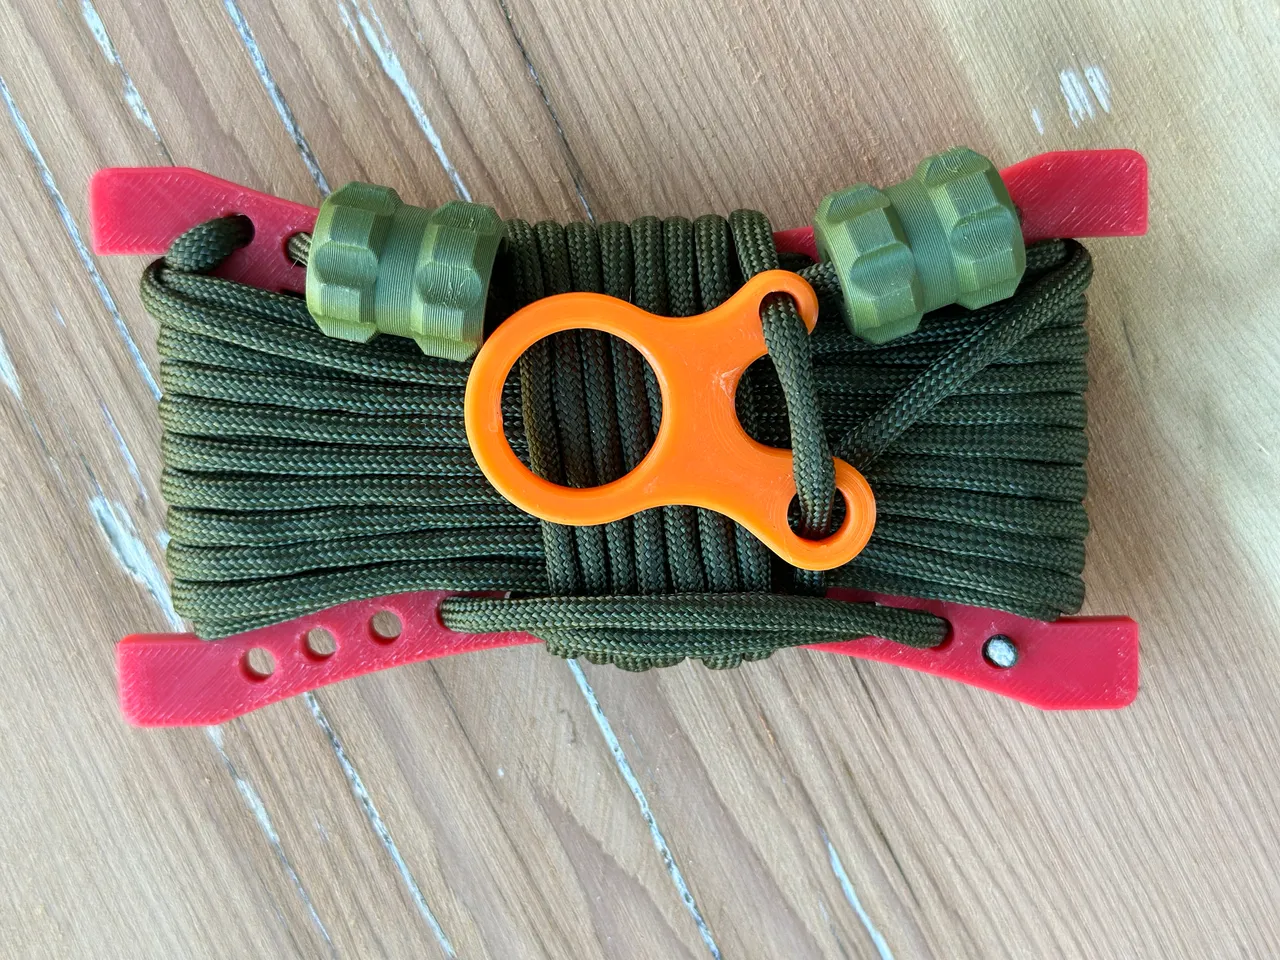 Paracord Spool For Pack by BW509